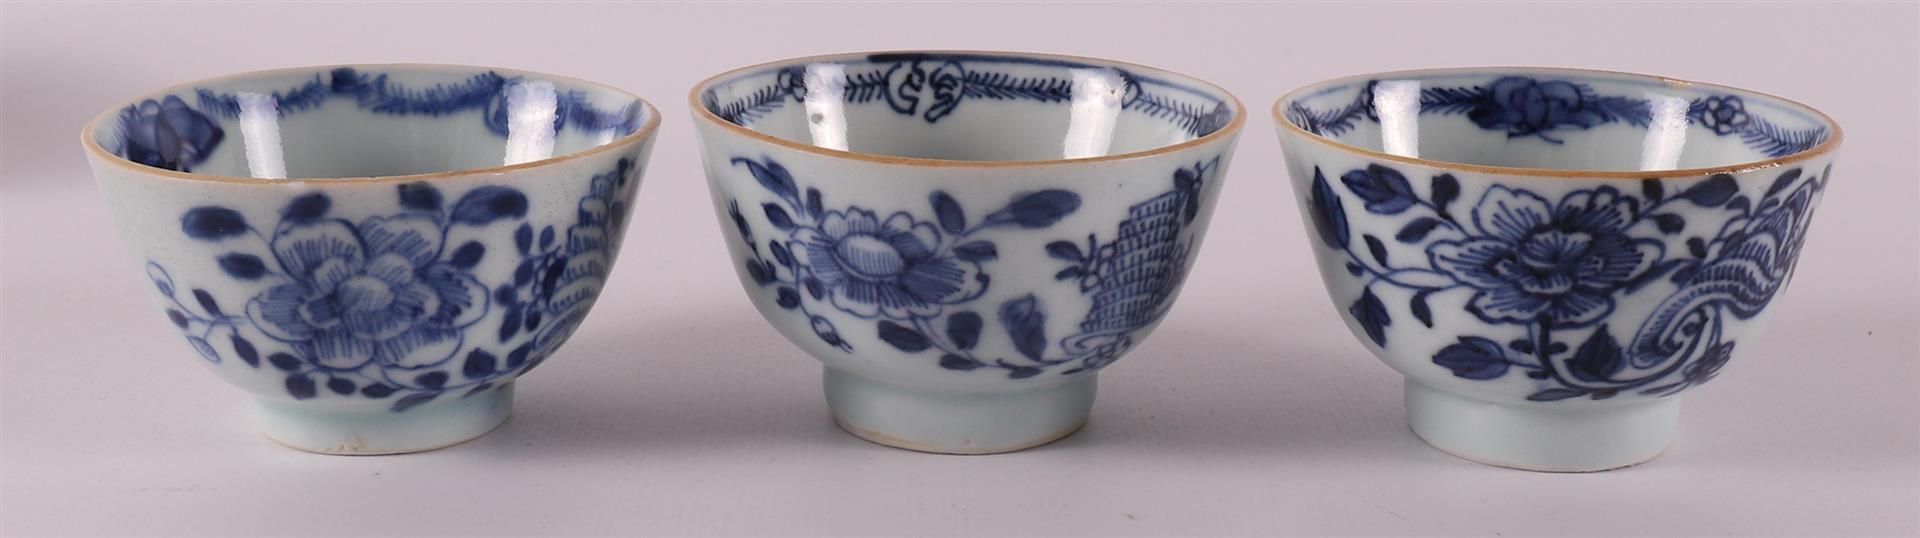 Six blue/white porcelain cups and saucers, China, Qianlong, 18th century. - Image 10 of 20